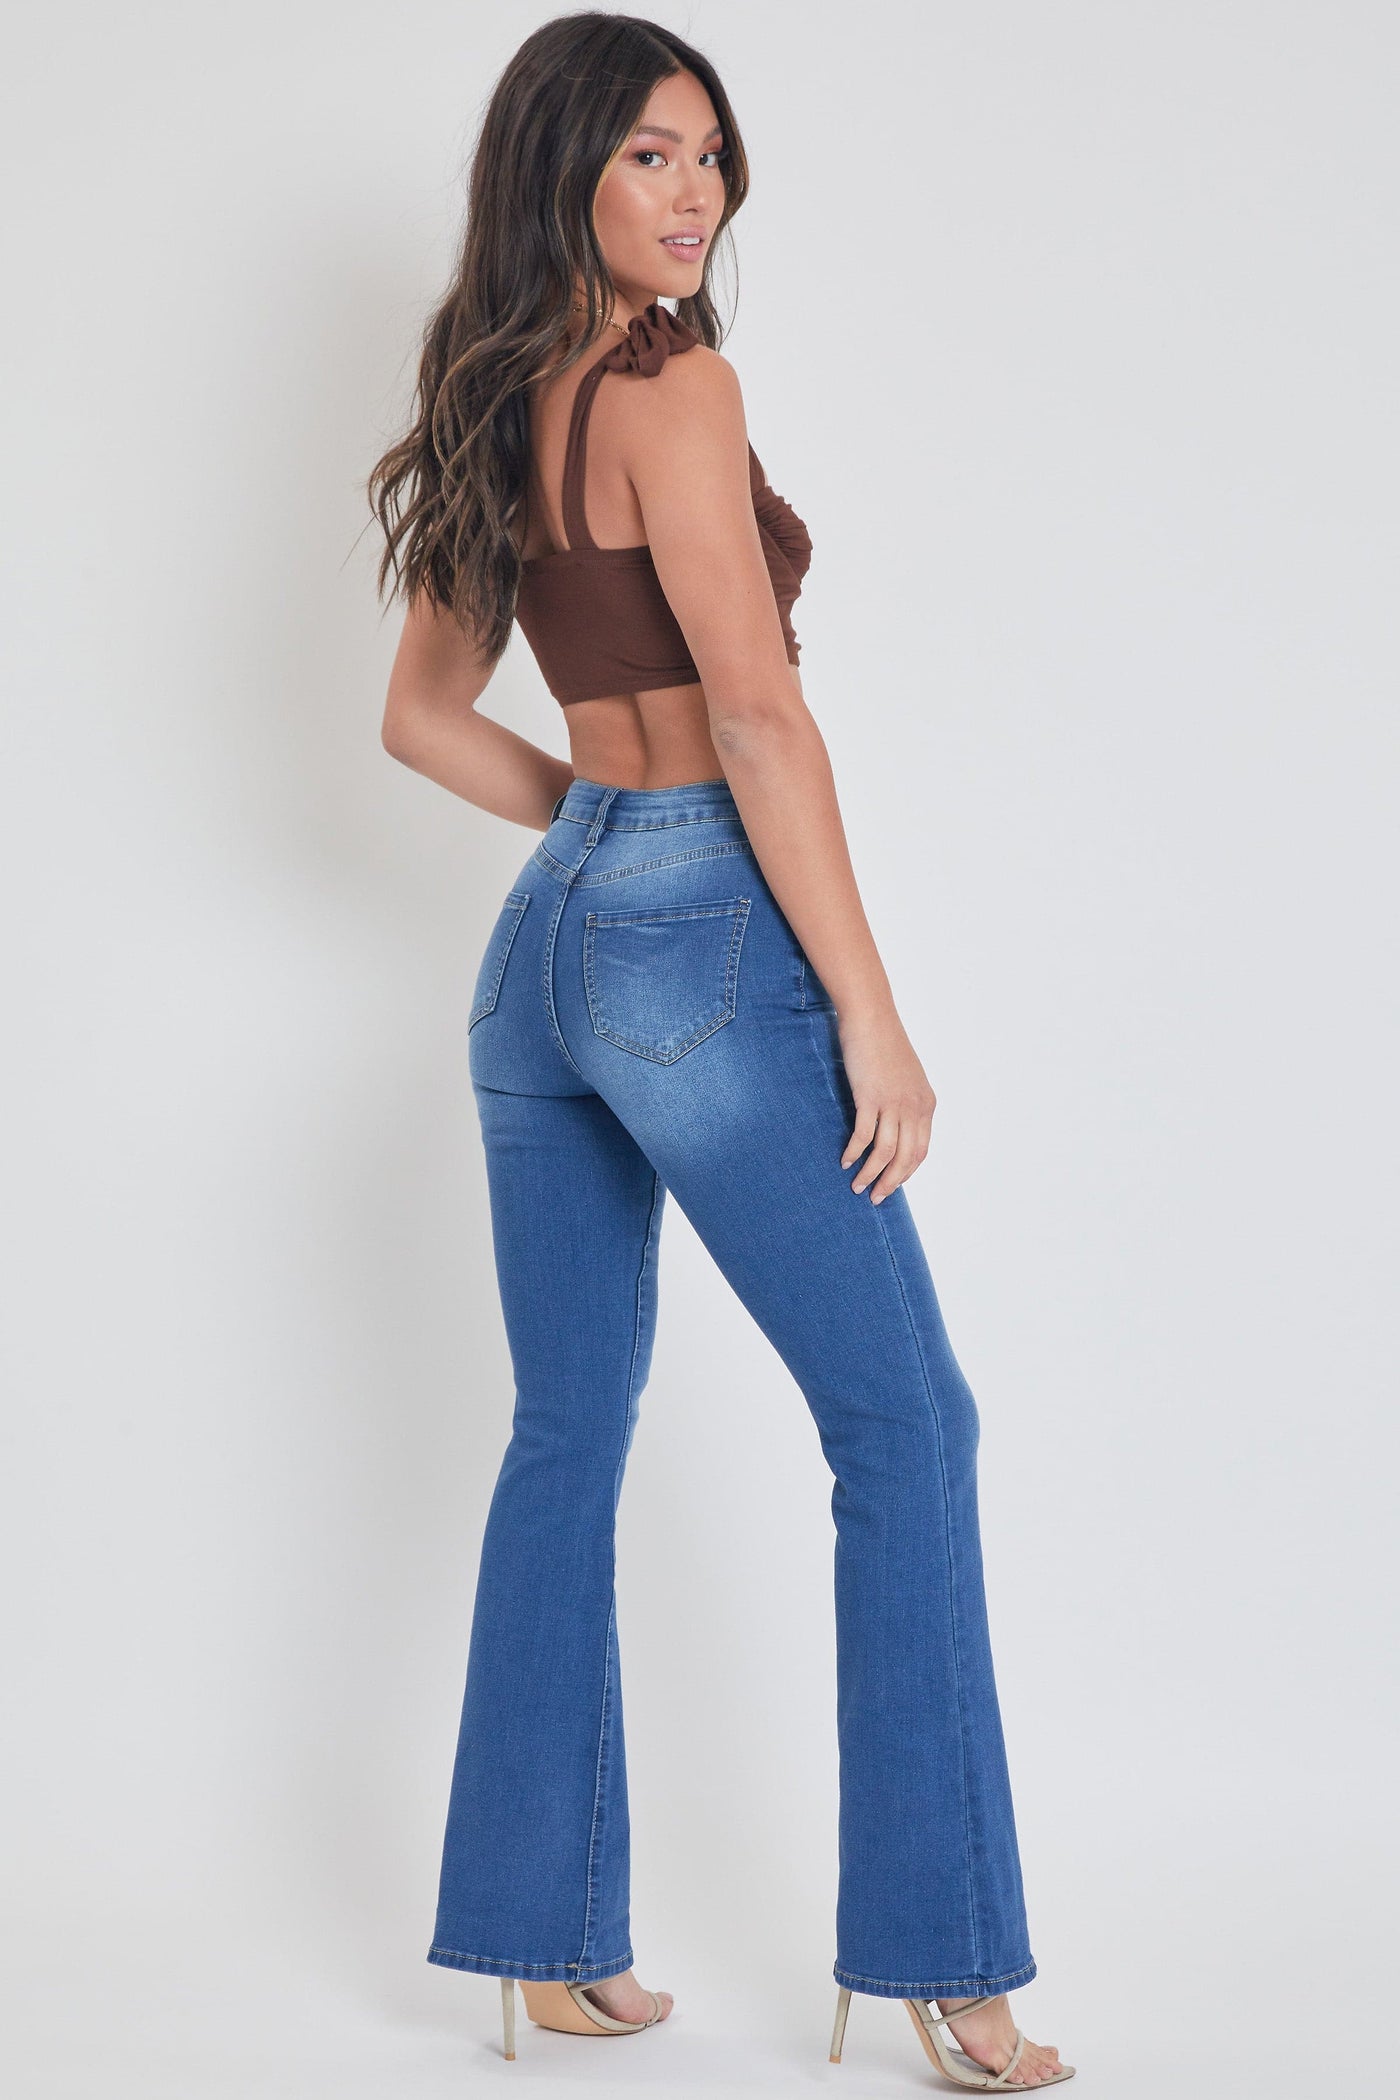 Women's Essential Non-Distressed Flare Jeans